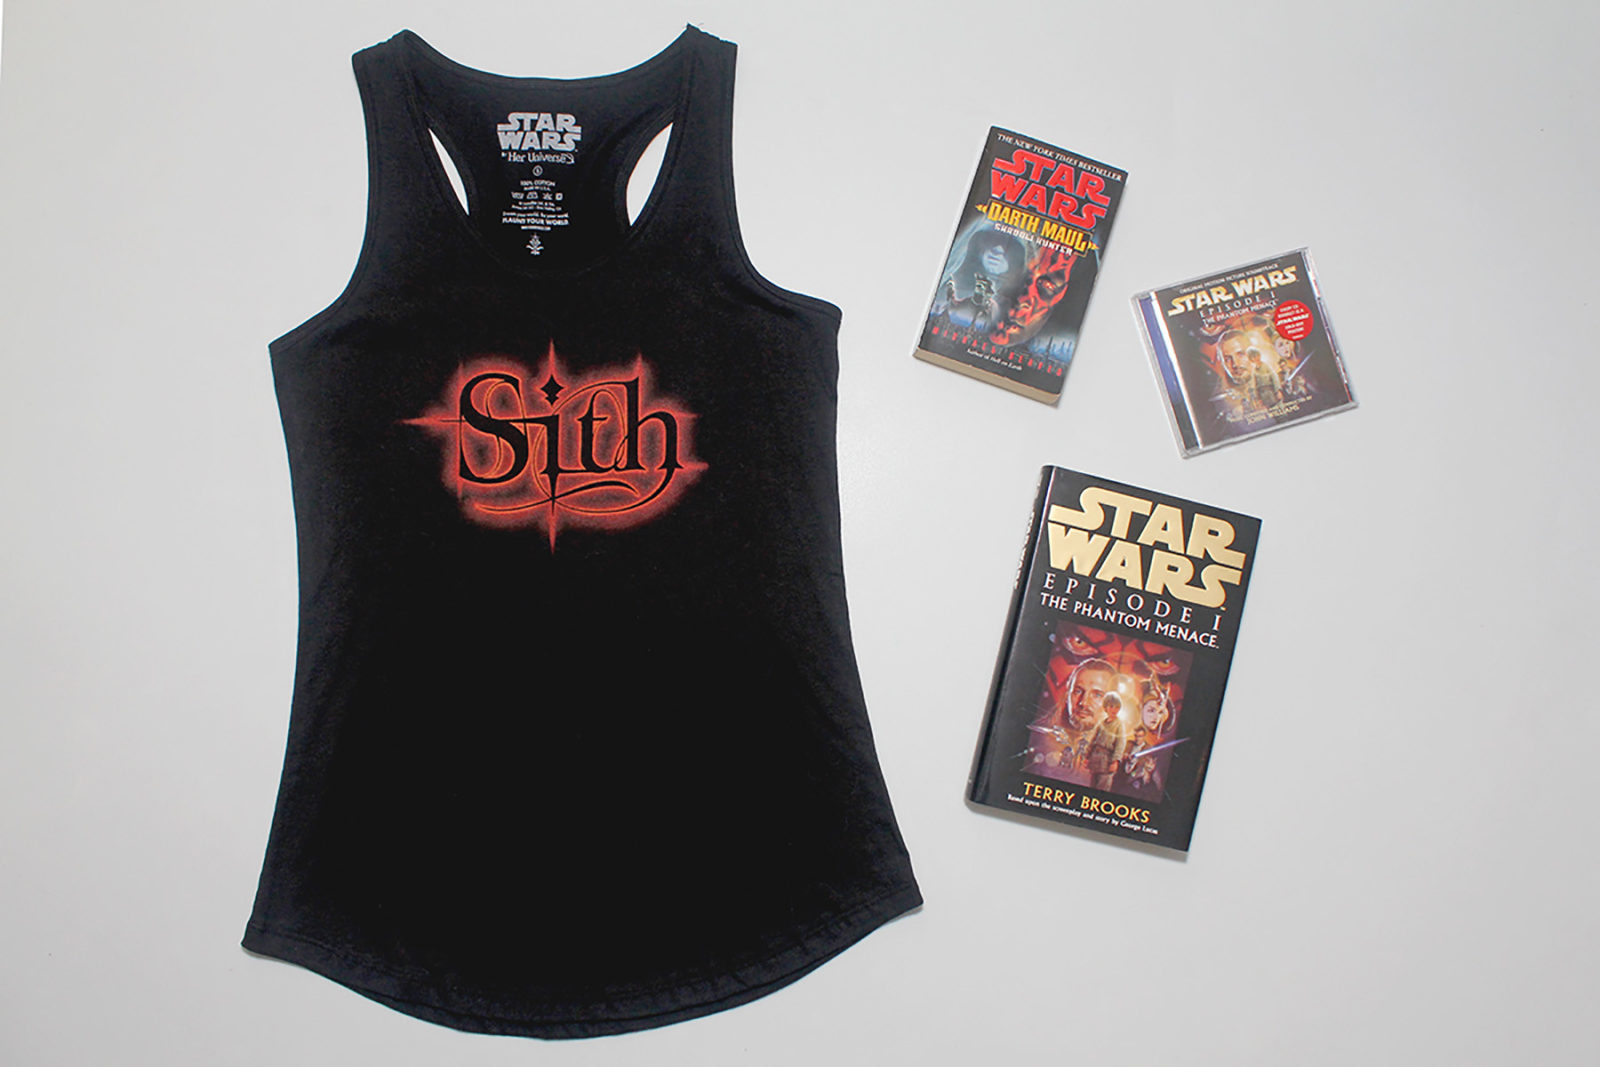 Women's Darth Maul themed Sith tank top by Her Universe